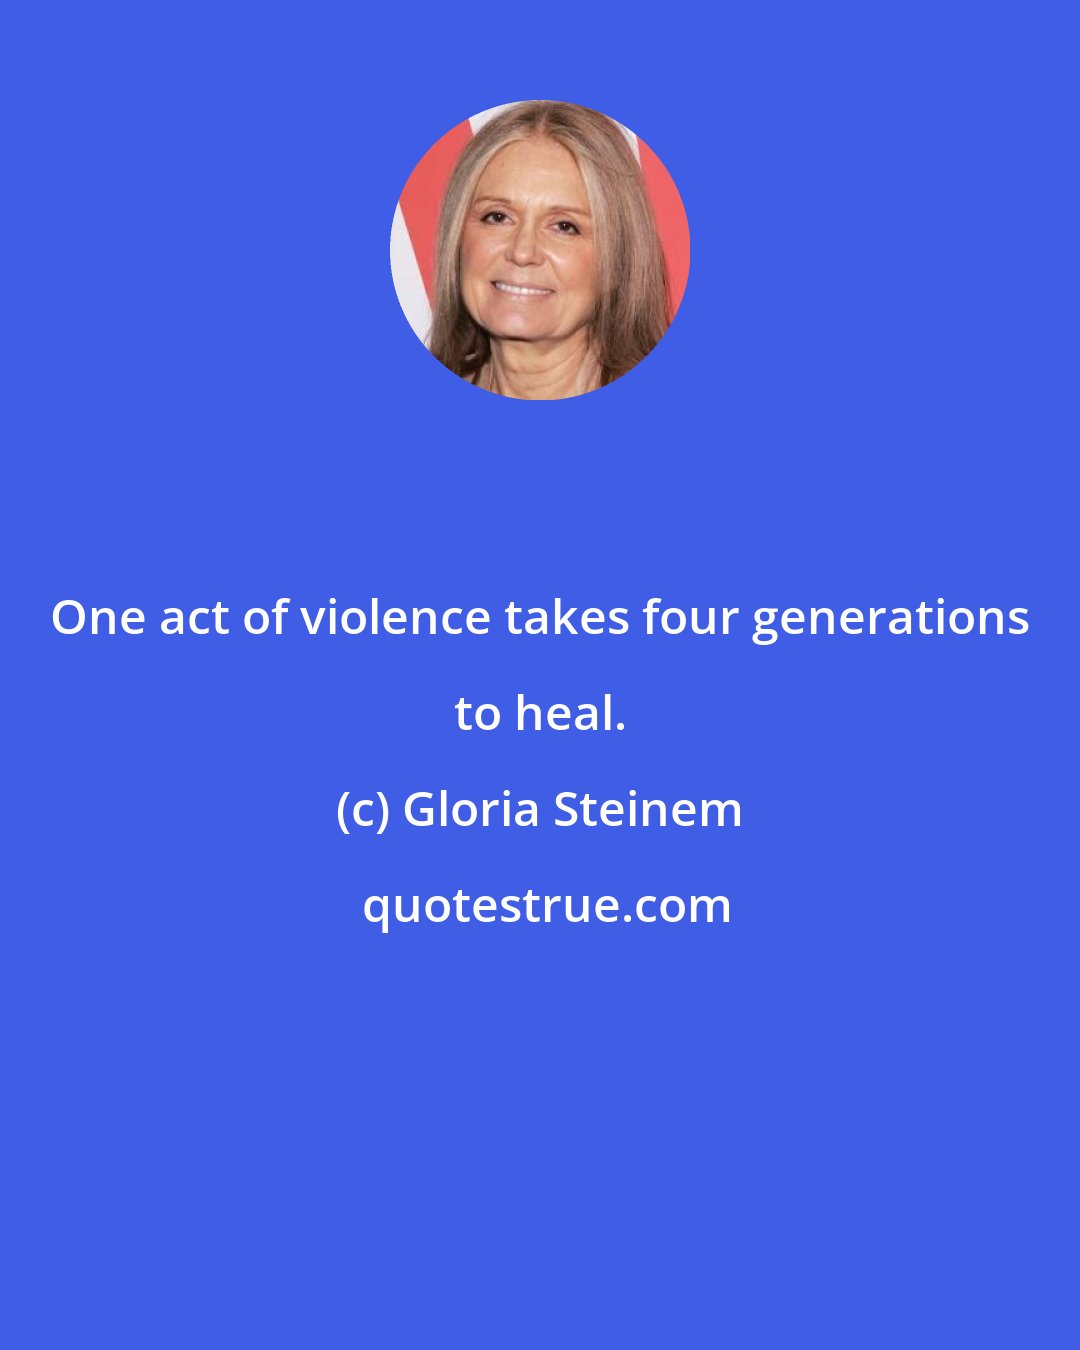 Gloria Steinem: One act of violence takes four generations to heal.